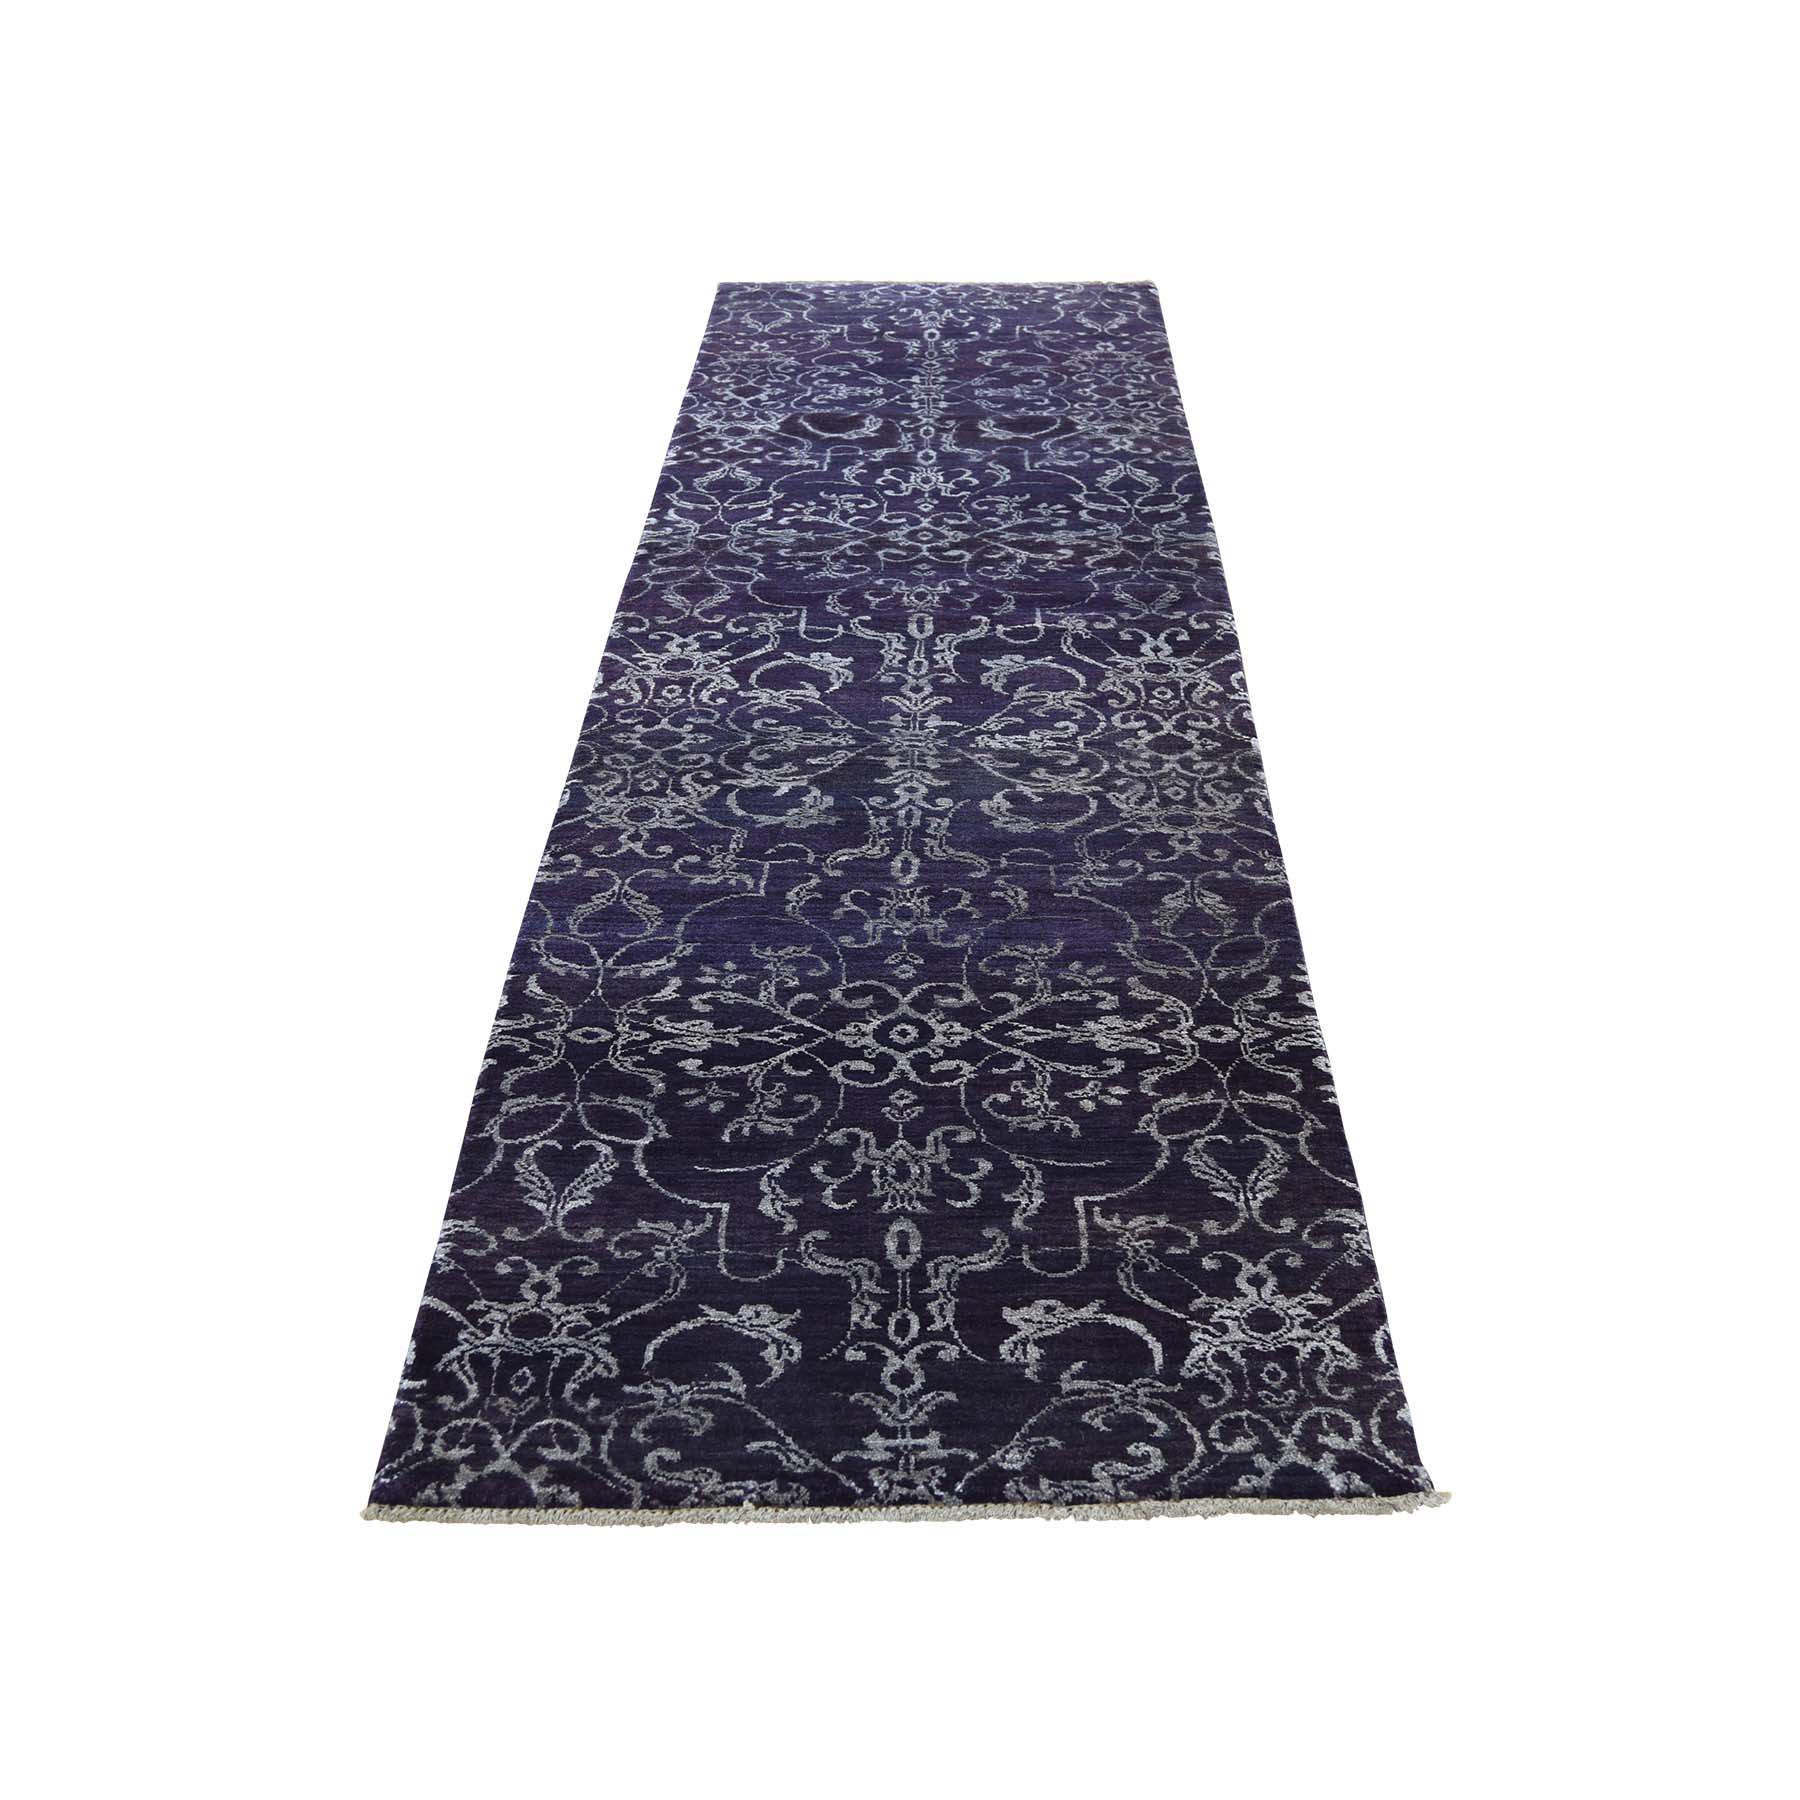 2'5"x9'7" Runner Wool and Silk Tone on Tone Damask Hand Made Oriental Rug 